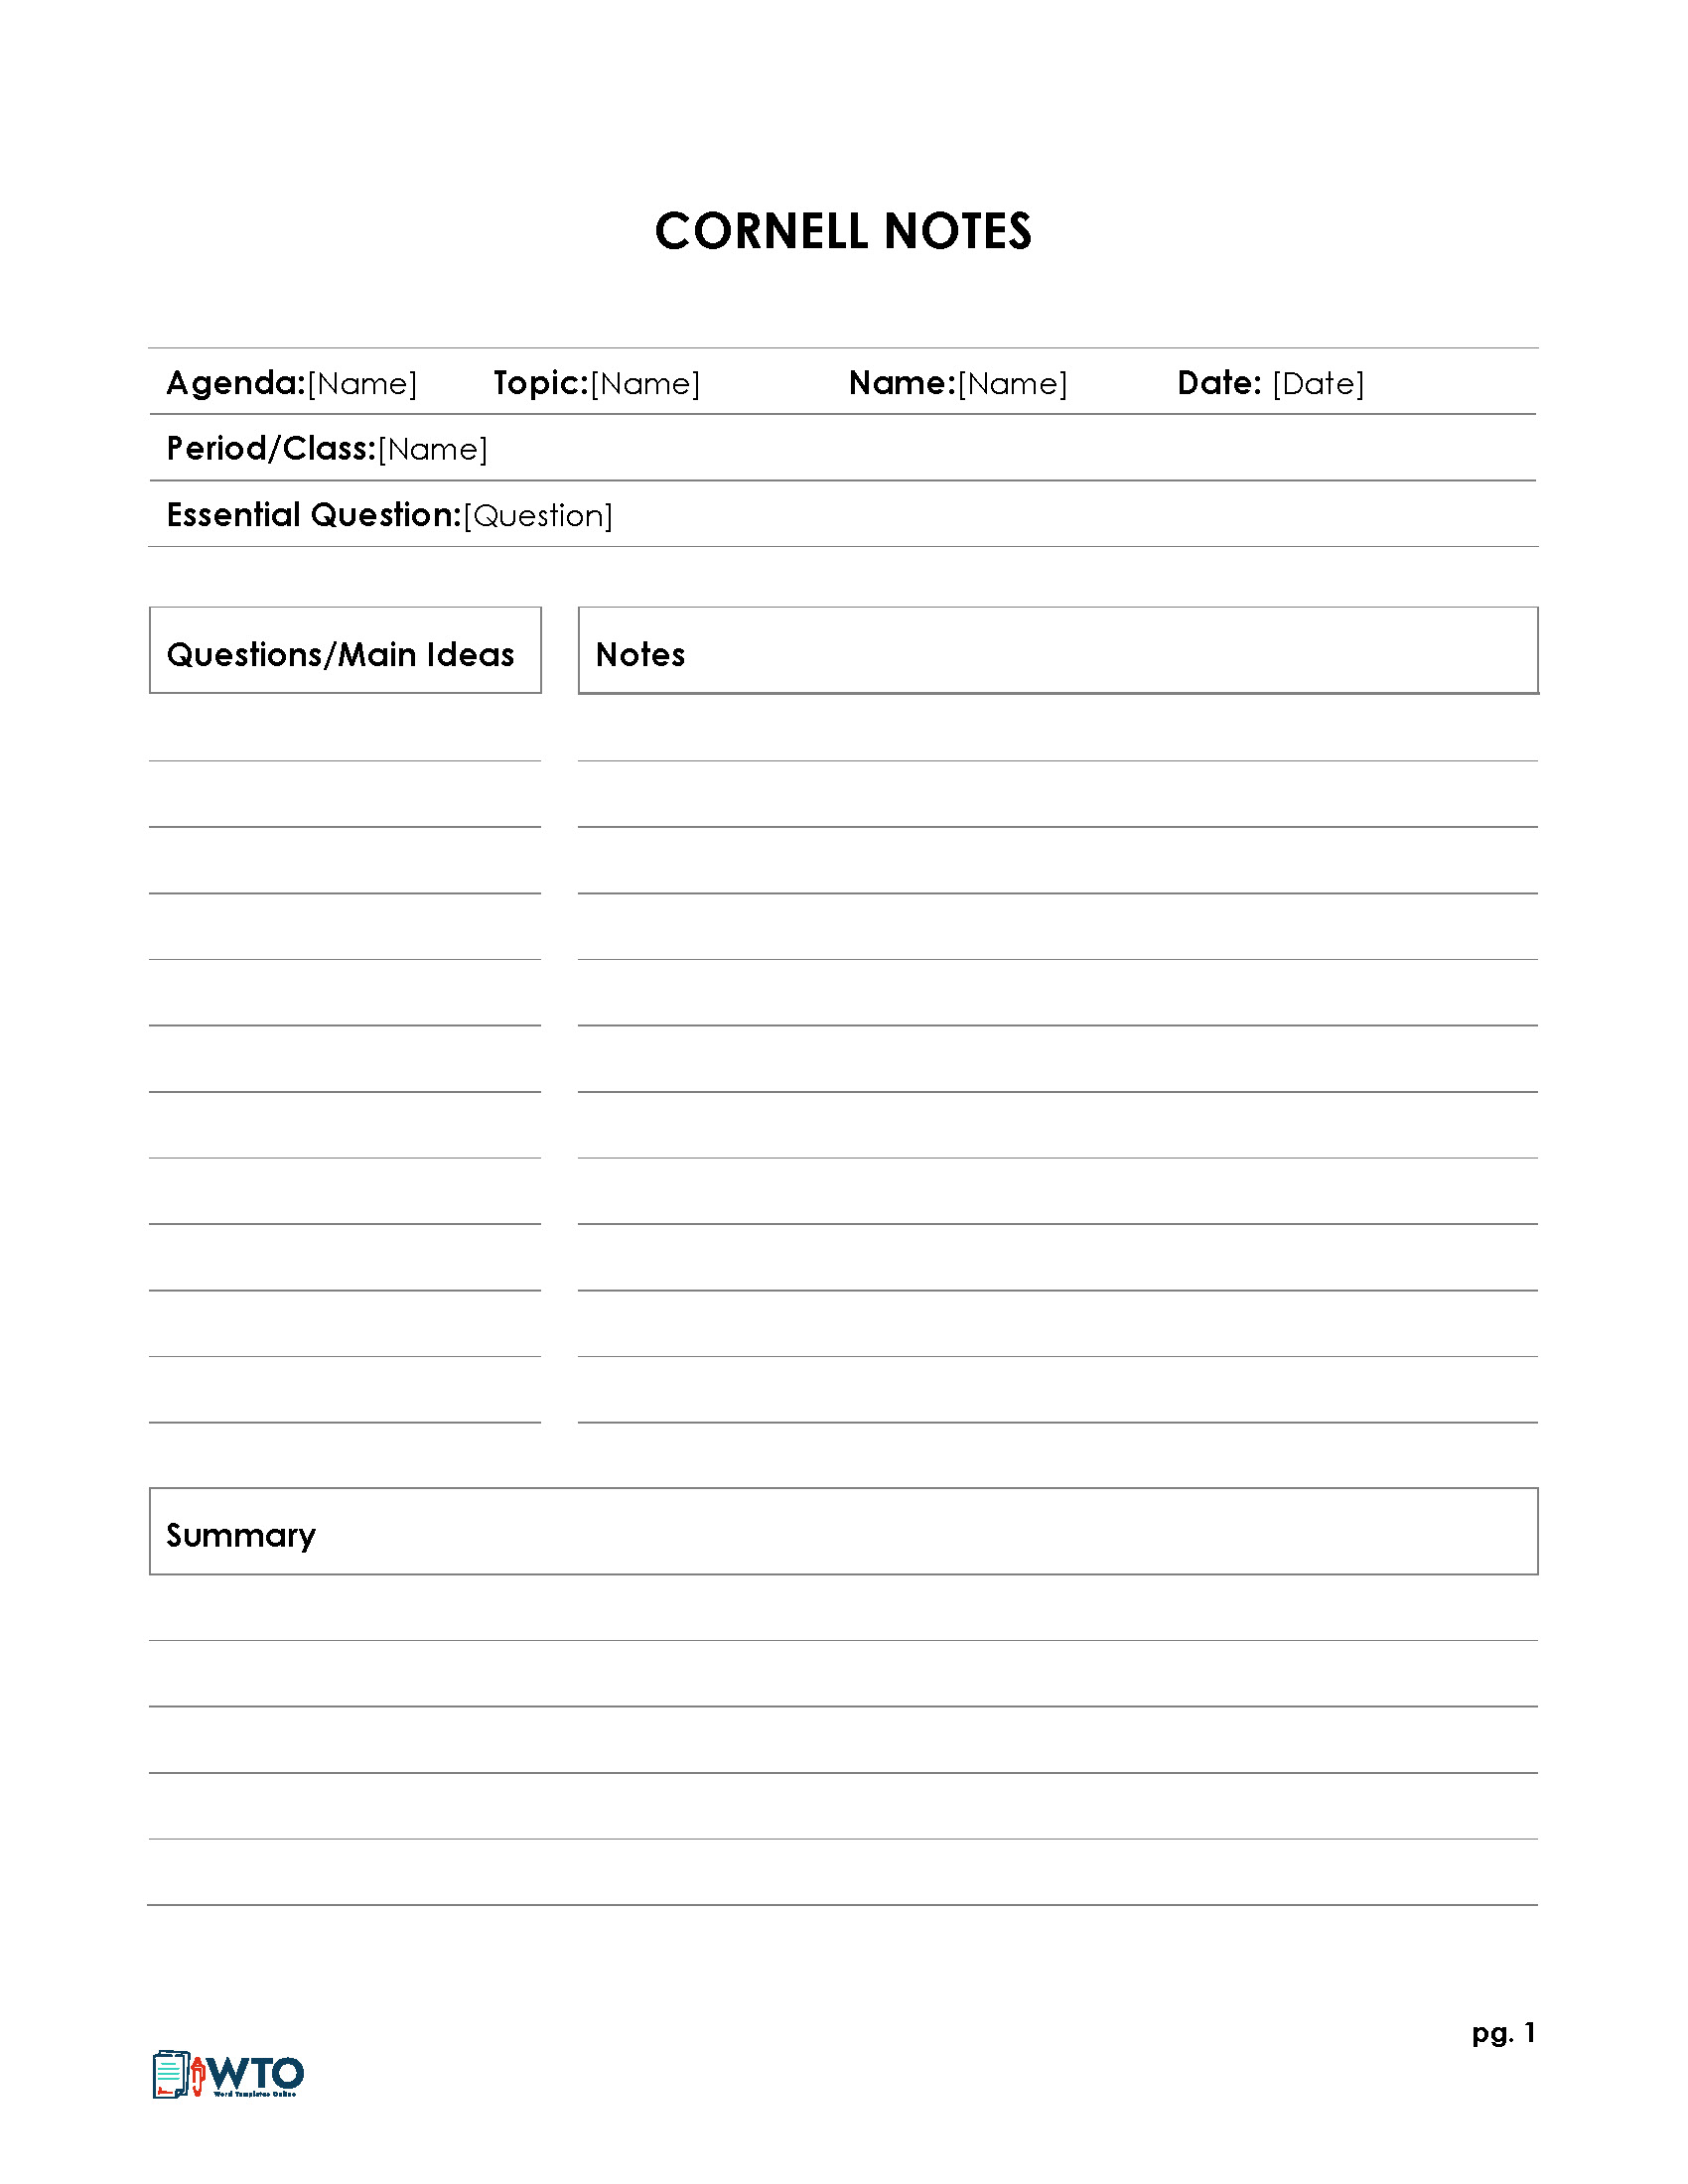 PDF Cornell Note Example Sample Download